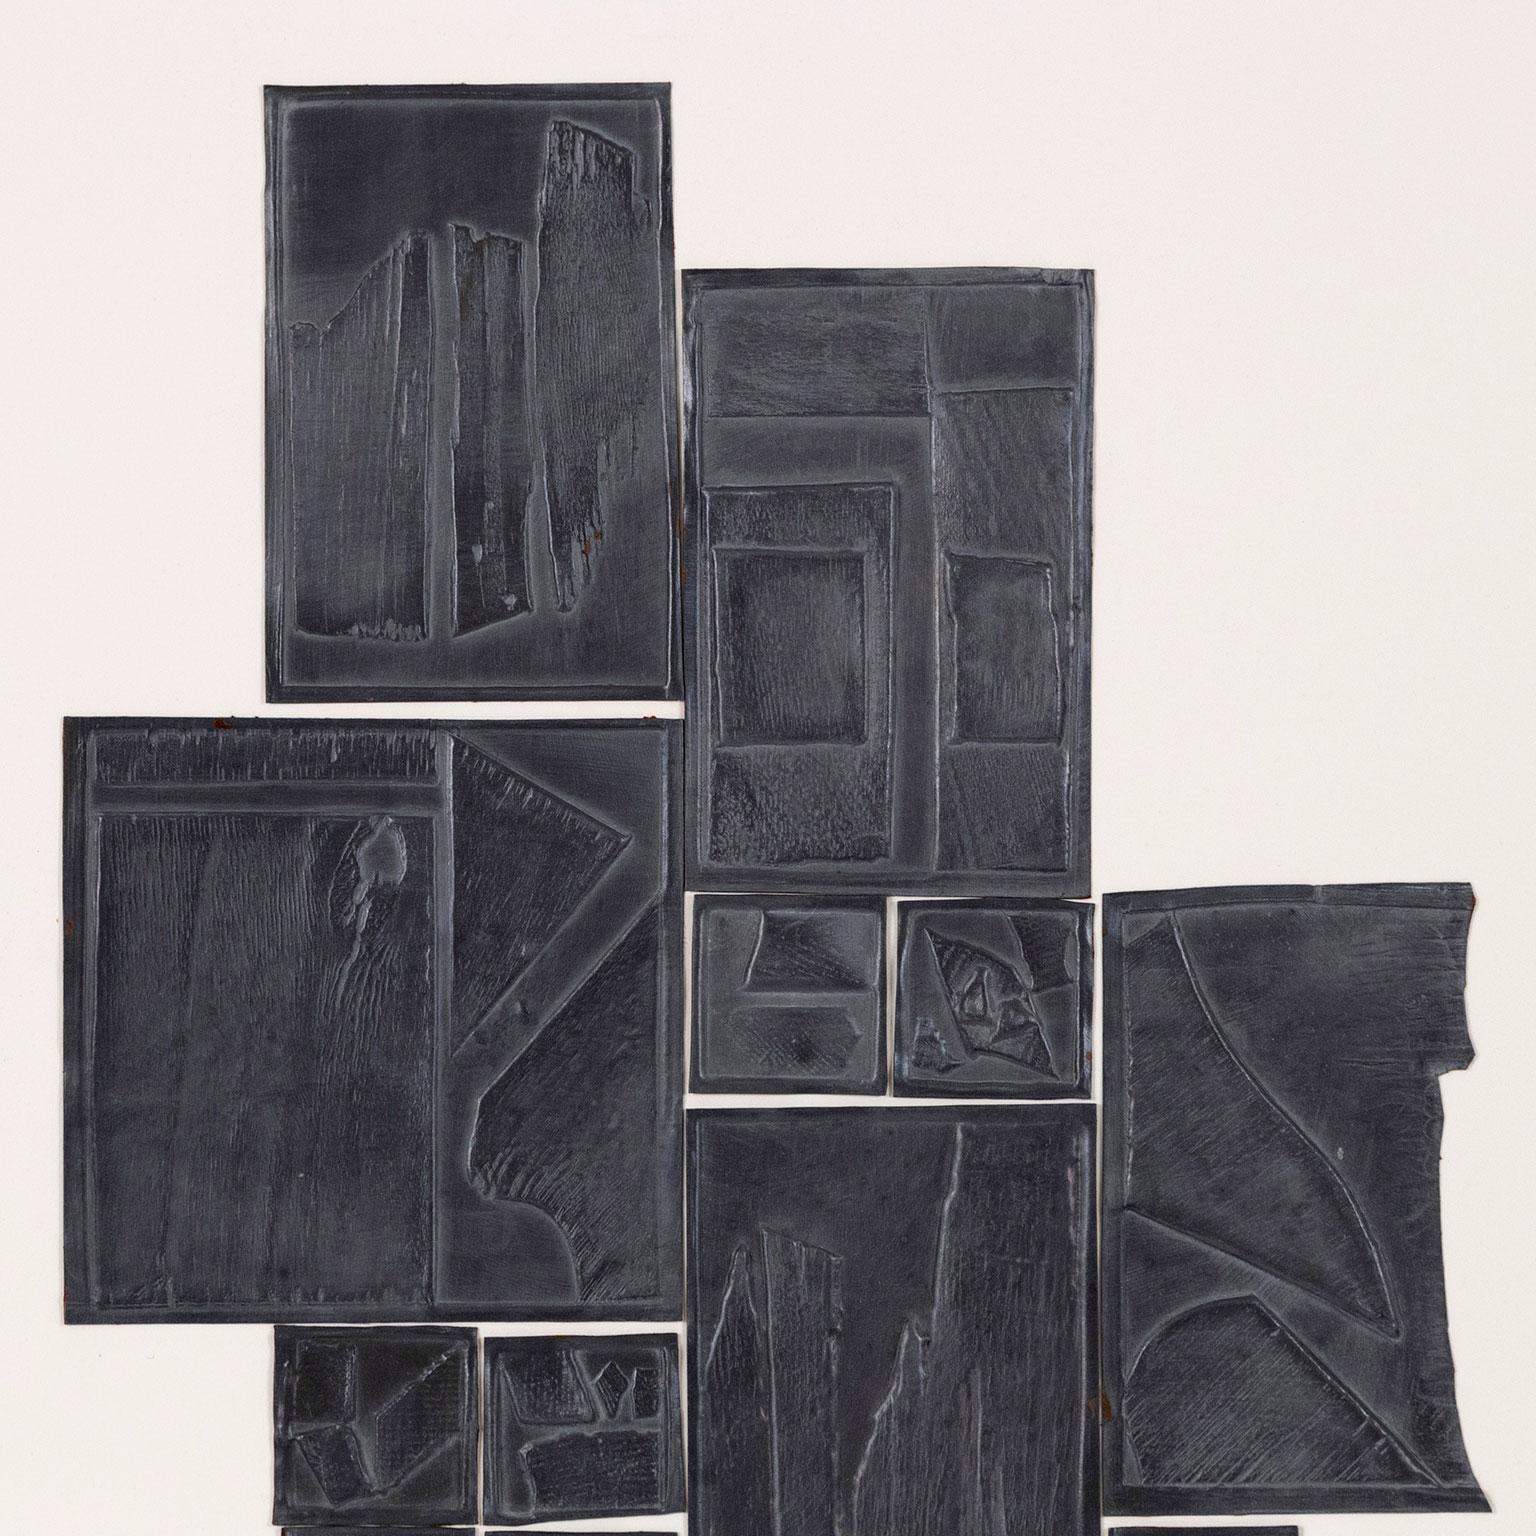 As always, Caviar20 is thrilled to present the esteemed work of Louise Nevelson - one of the most revered and unique artists of the 20th century.  (Also, an artist who continues to be undervalued - compared to her male contemporaries...On the plus